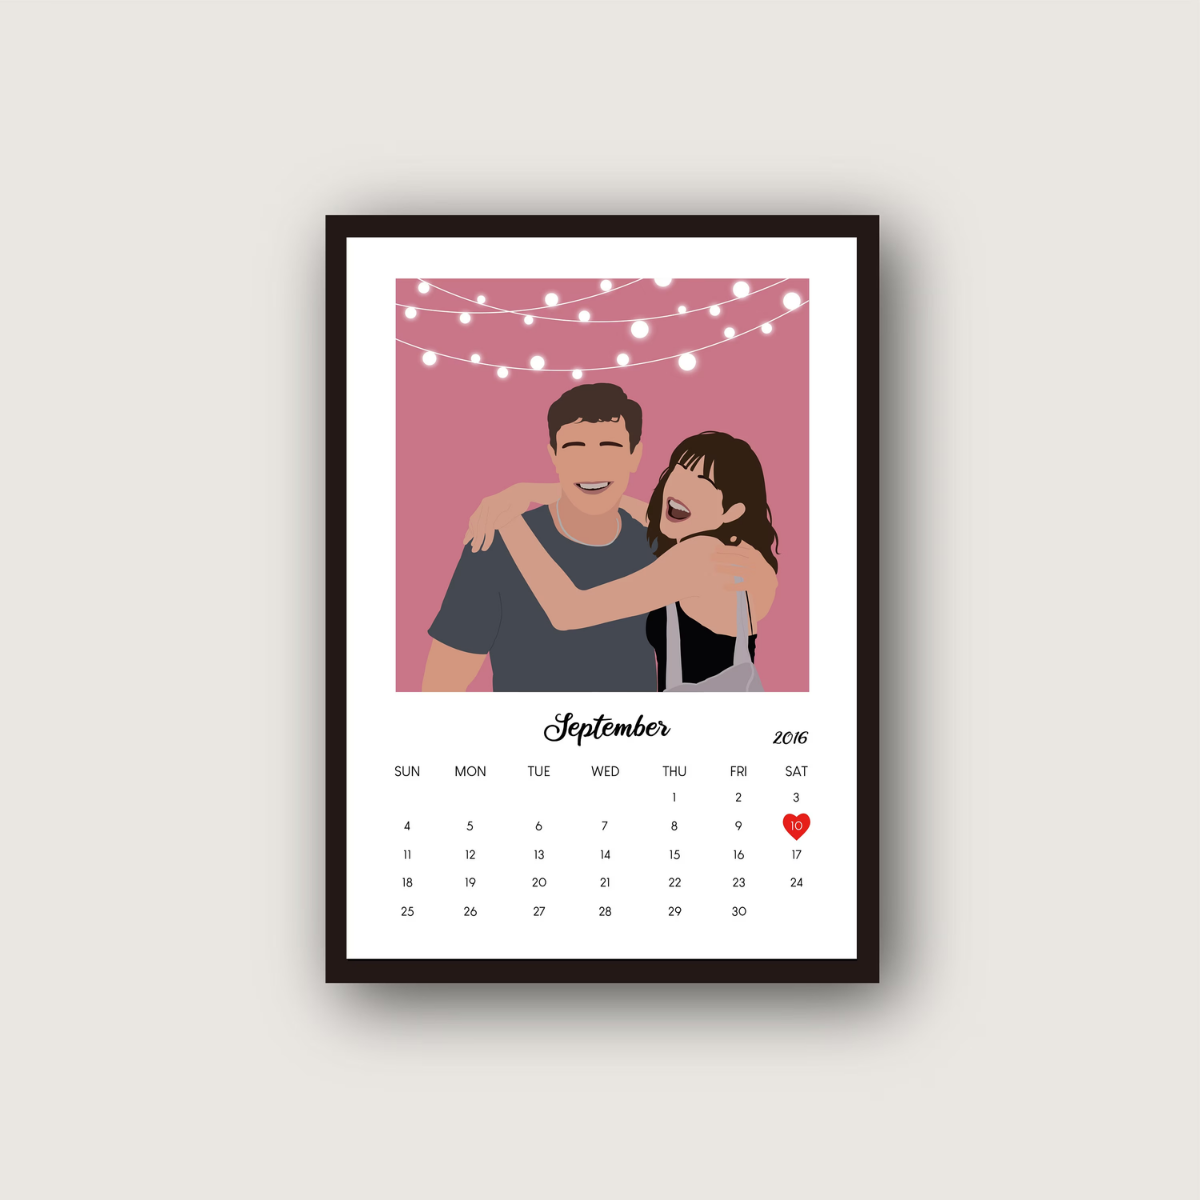 13. Capture Memories Year-Round with a Personalized Calendar - Perfect Anniversary Gift for Him